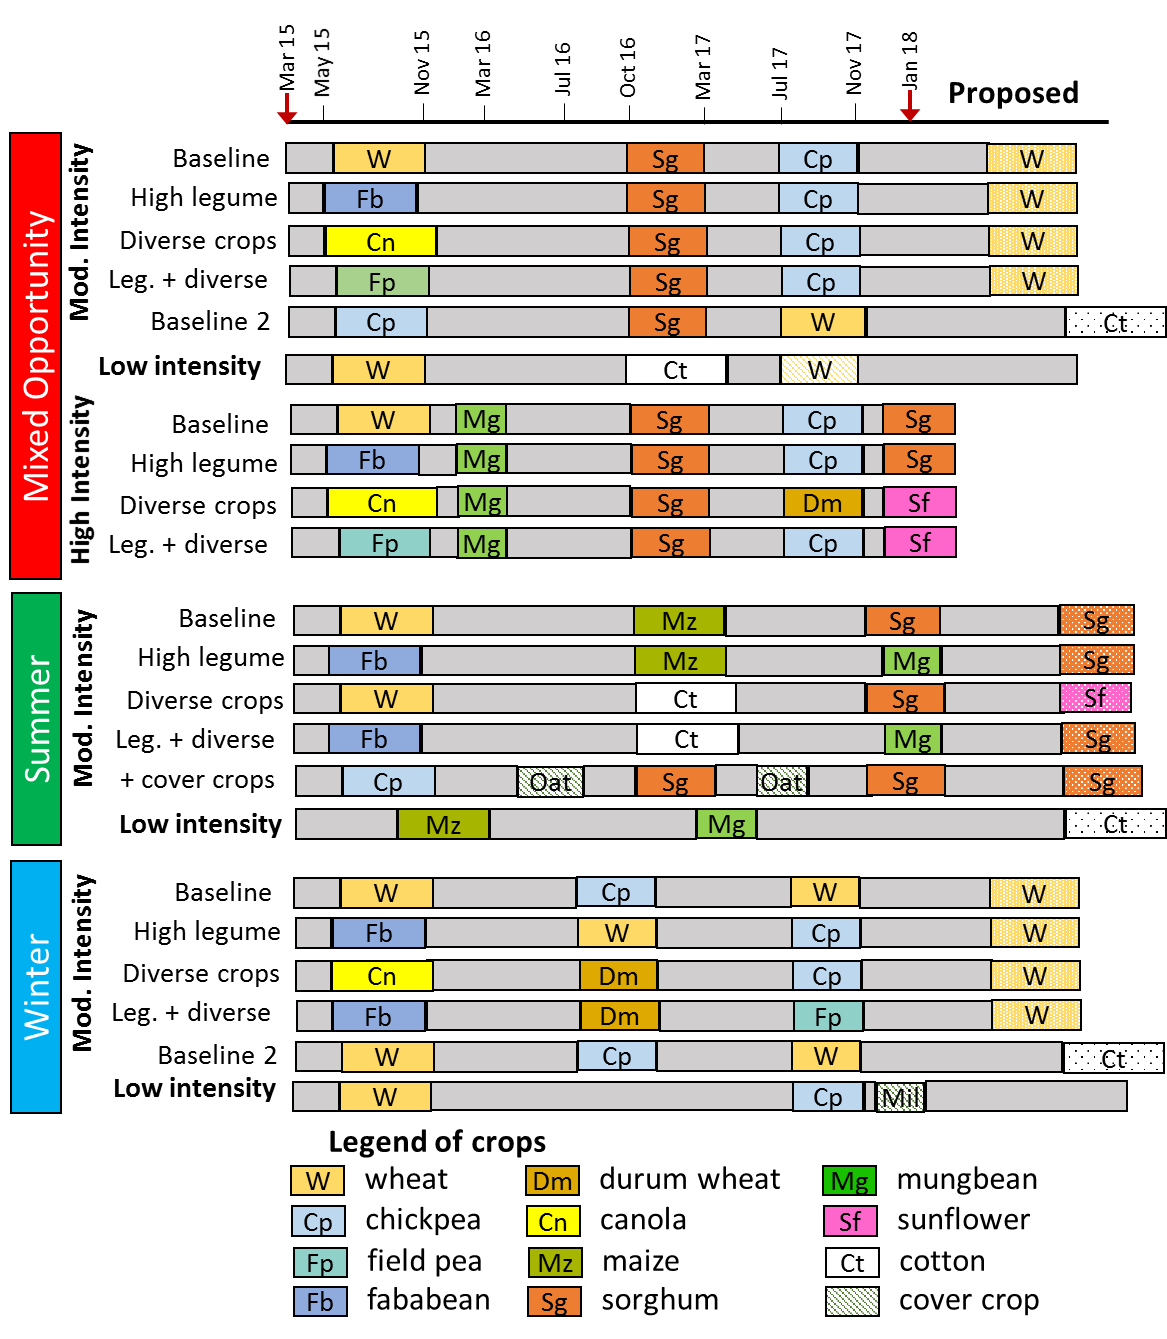 Figure 1 is a colour-coded timeline of different crop sequences deployed over the first 2.5 years (from Mar 15 to Jan 18) at the core farming systems experiment. Different crop sequences have emerged based upon soil water availability triggering a sowing opportunity, rules that dictate crop choice across systems aimed to represent winter dominated, summer dominated or mixed opportunity cropping systems.